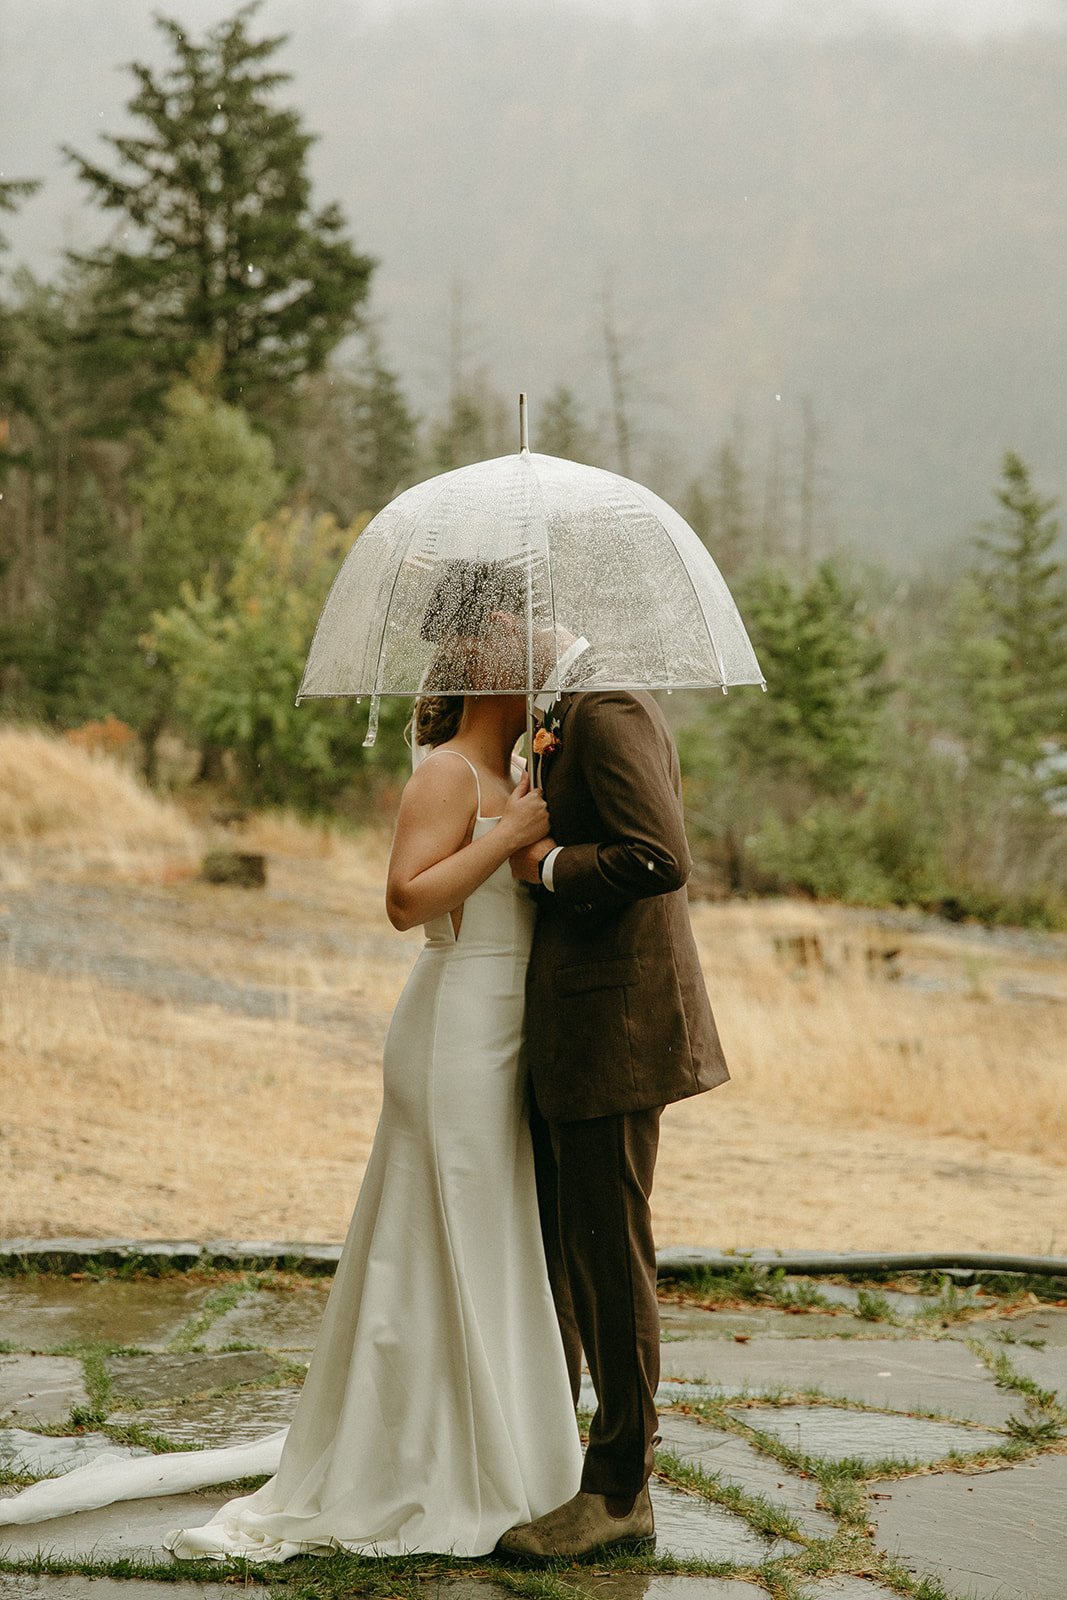 Bride and groom kissing under an umbrella